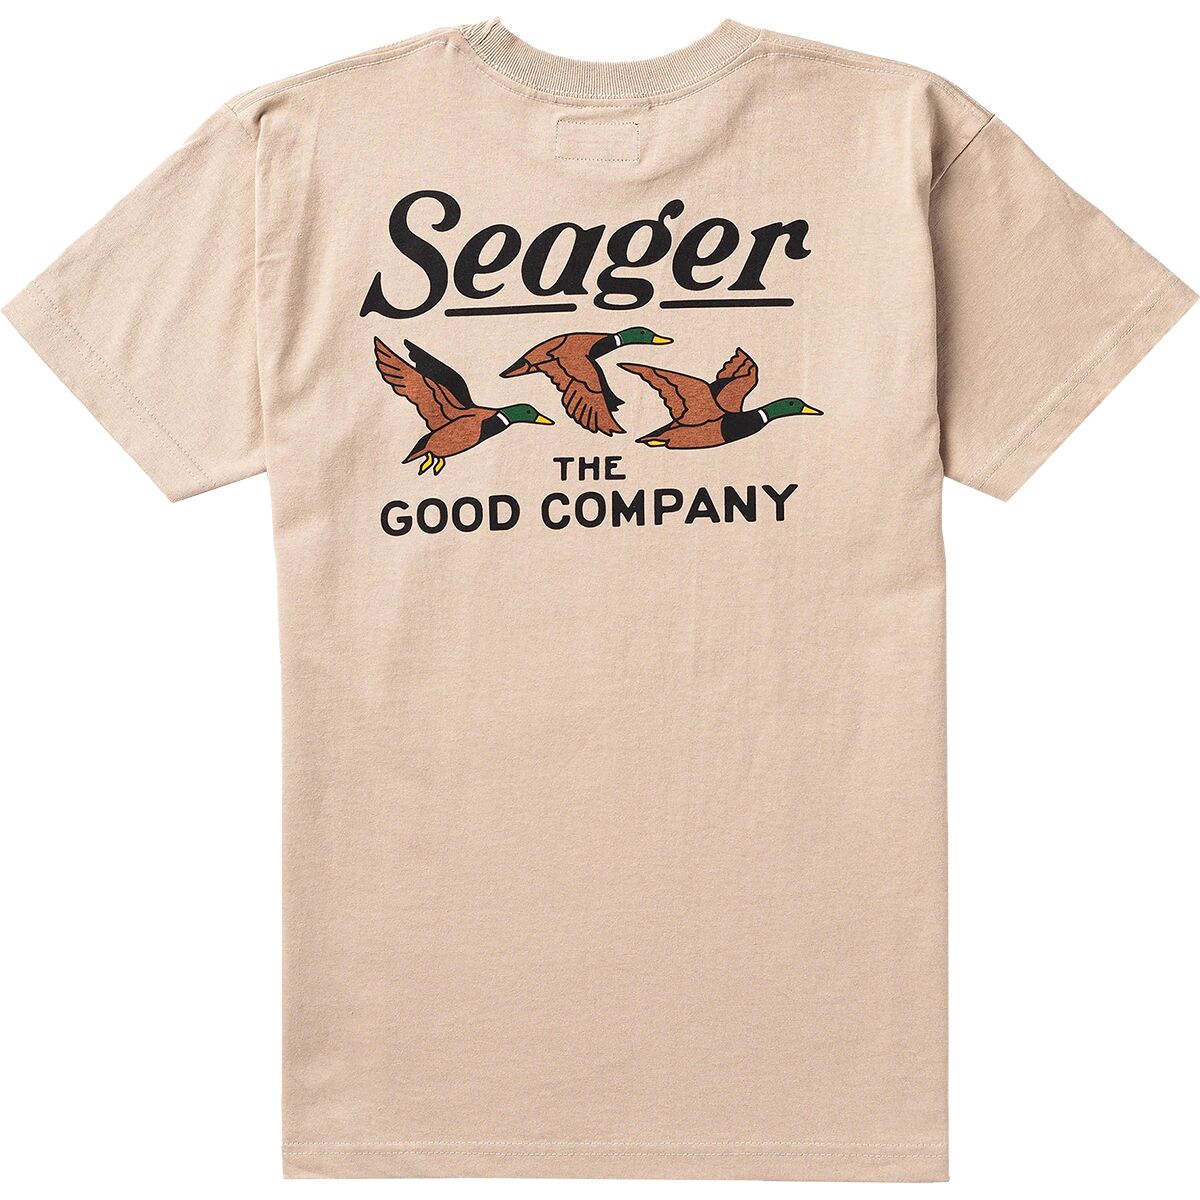 Seager Co. The Good Company T-Shirt - Men's